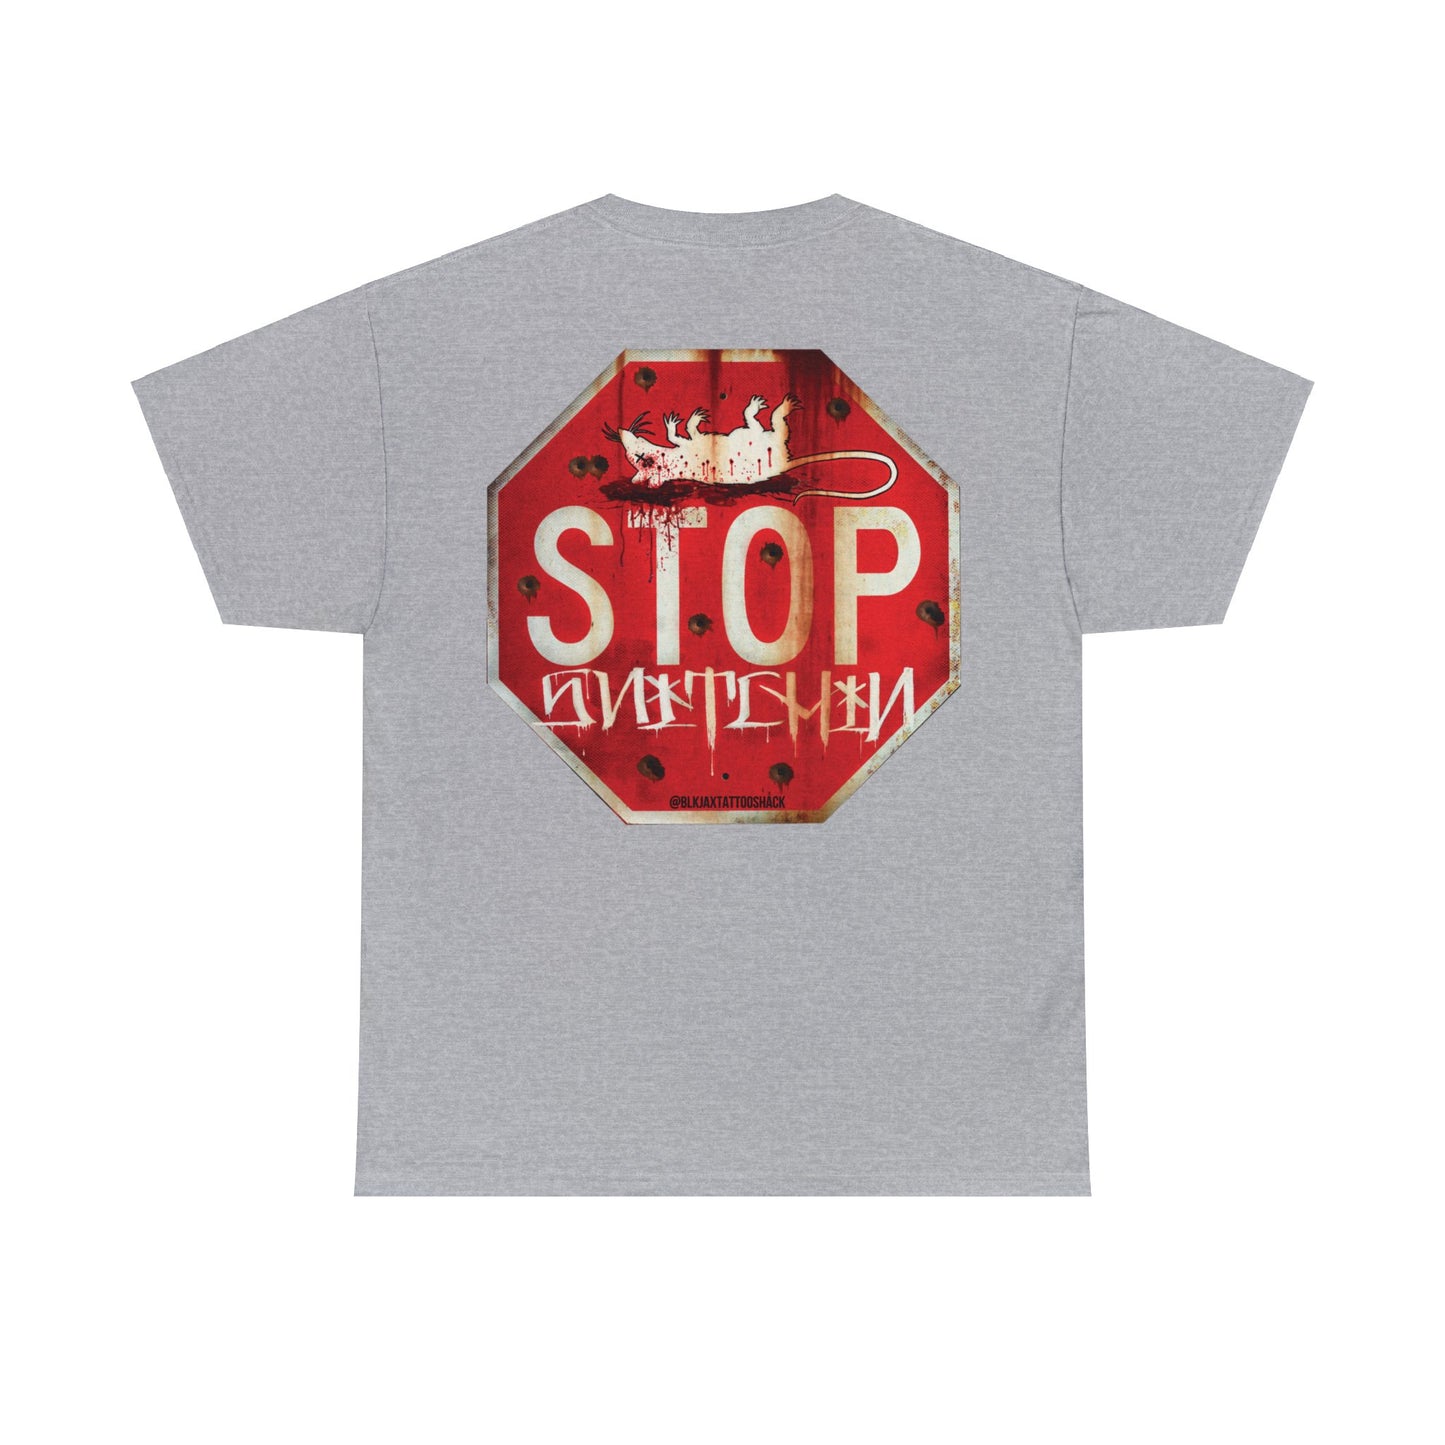 AJ's Stop Snitchin "Fink" Edition Tee